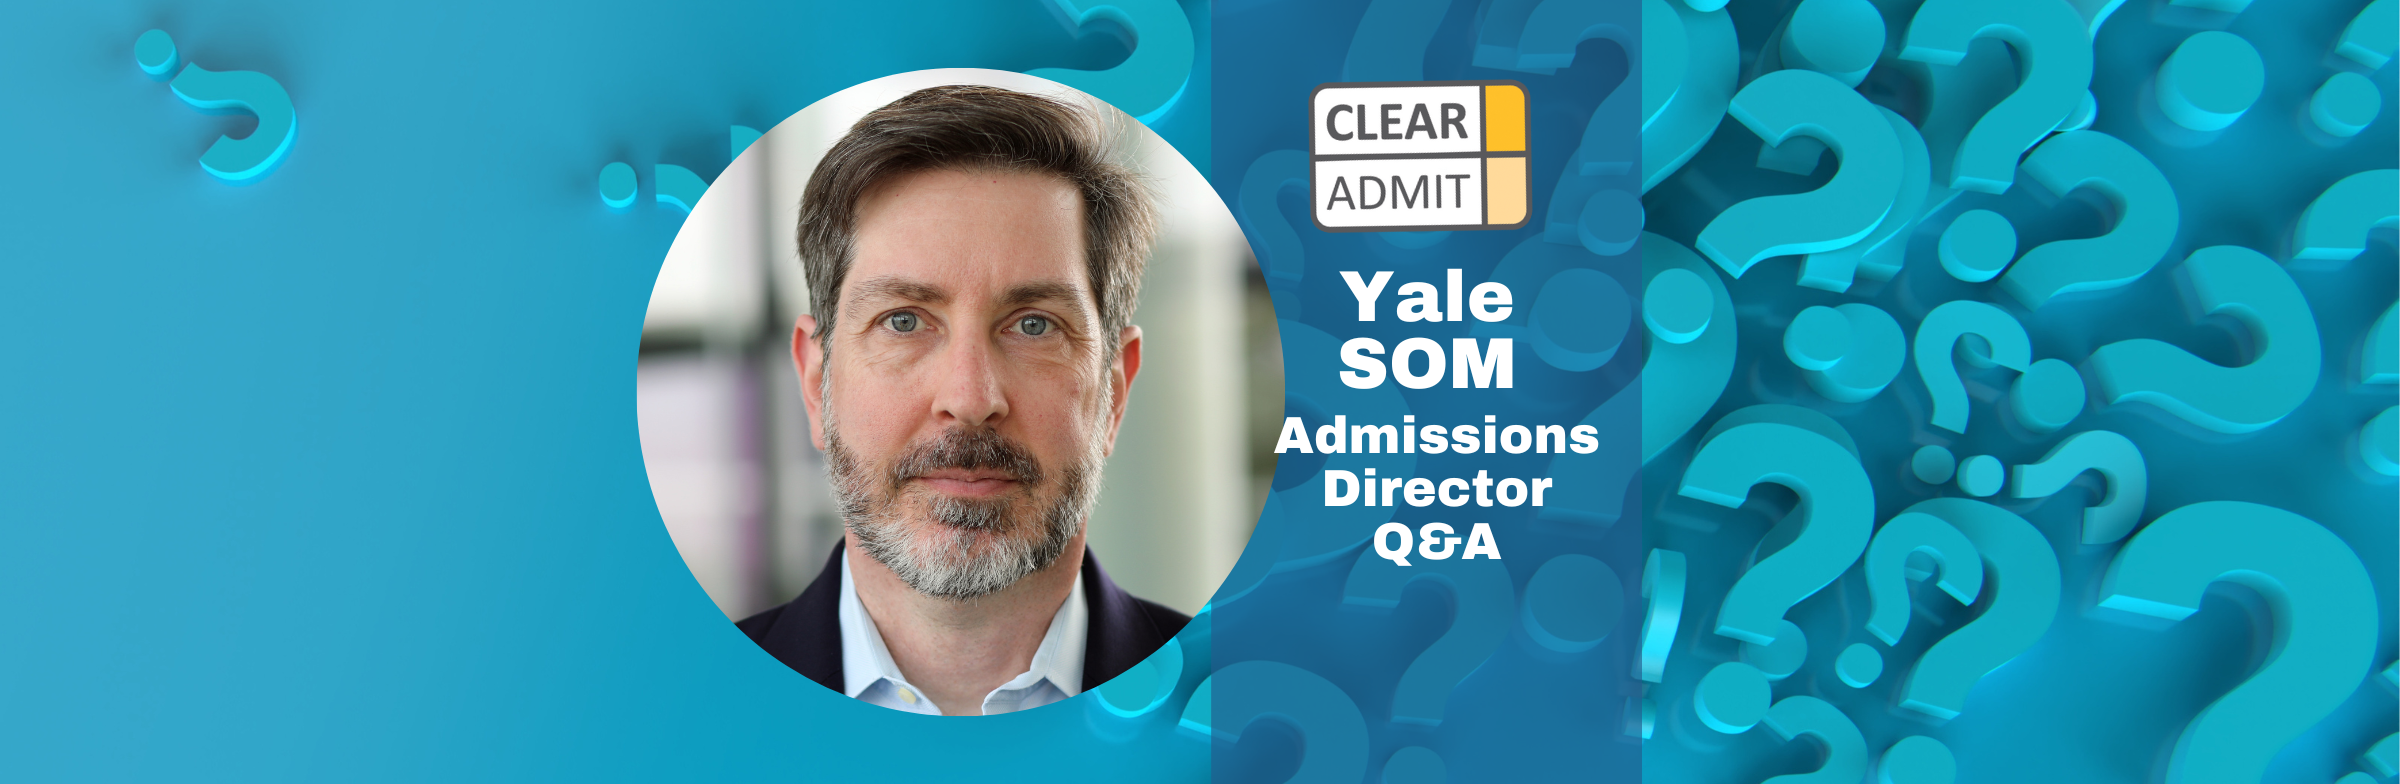 Image for Admissions Director Q&A: Bruce DelMonico of the Yale School of Management